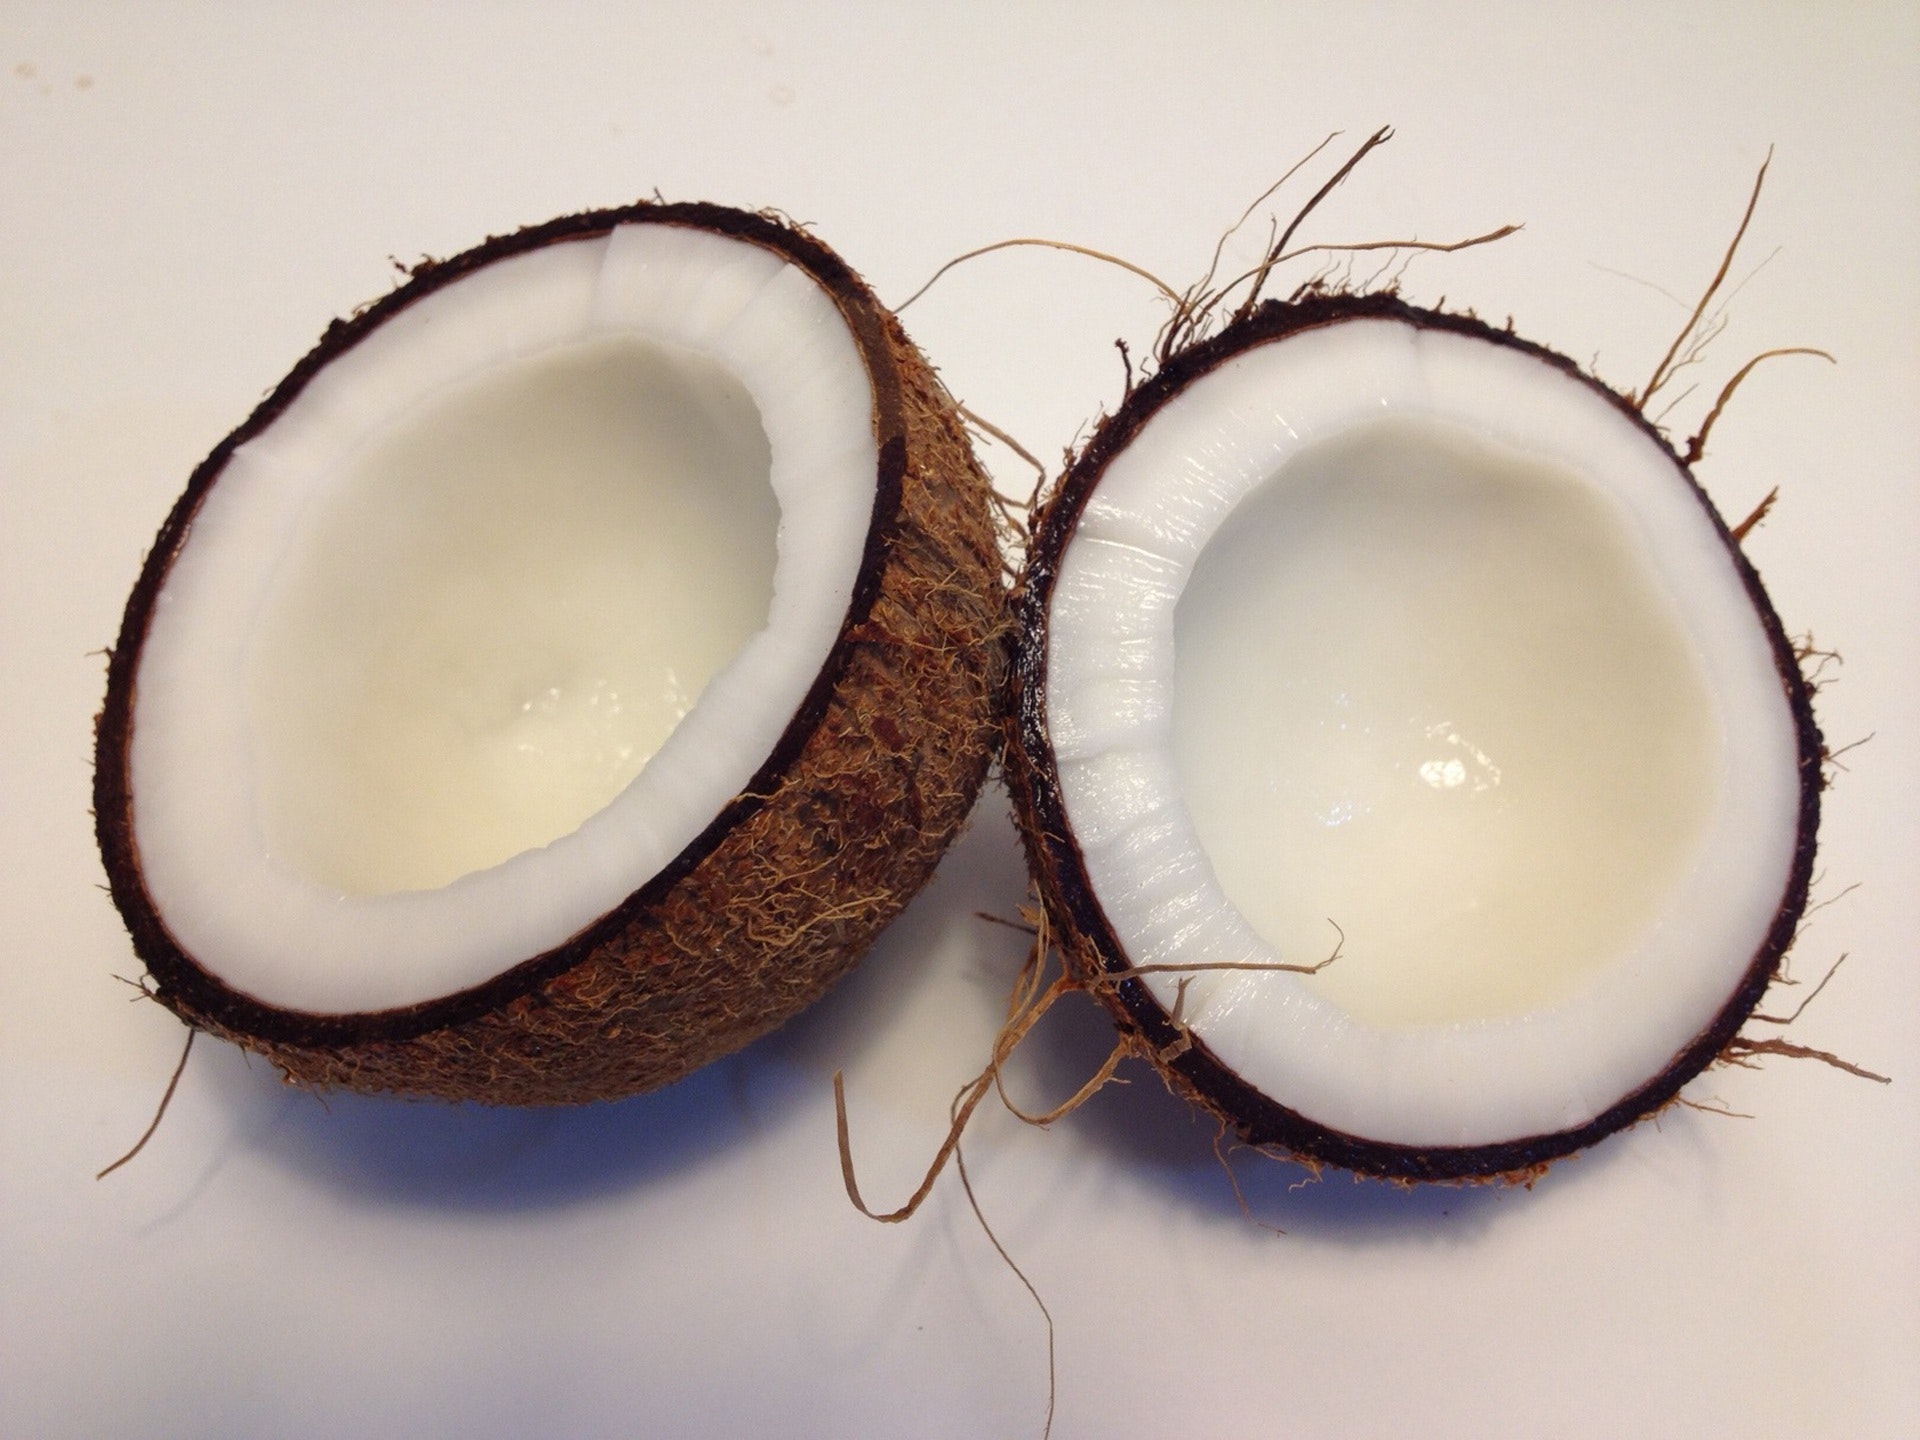 Coconut Oil Benefits for Skin and Hair